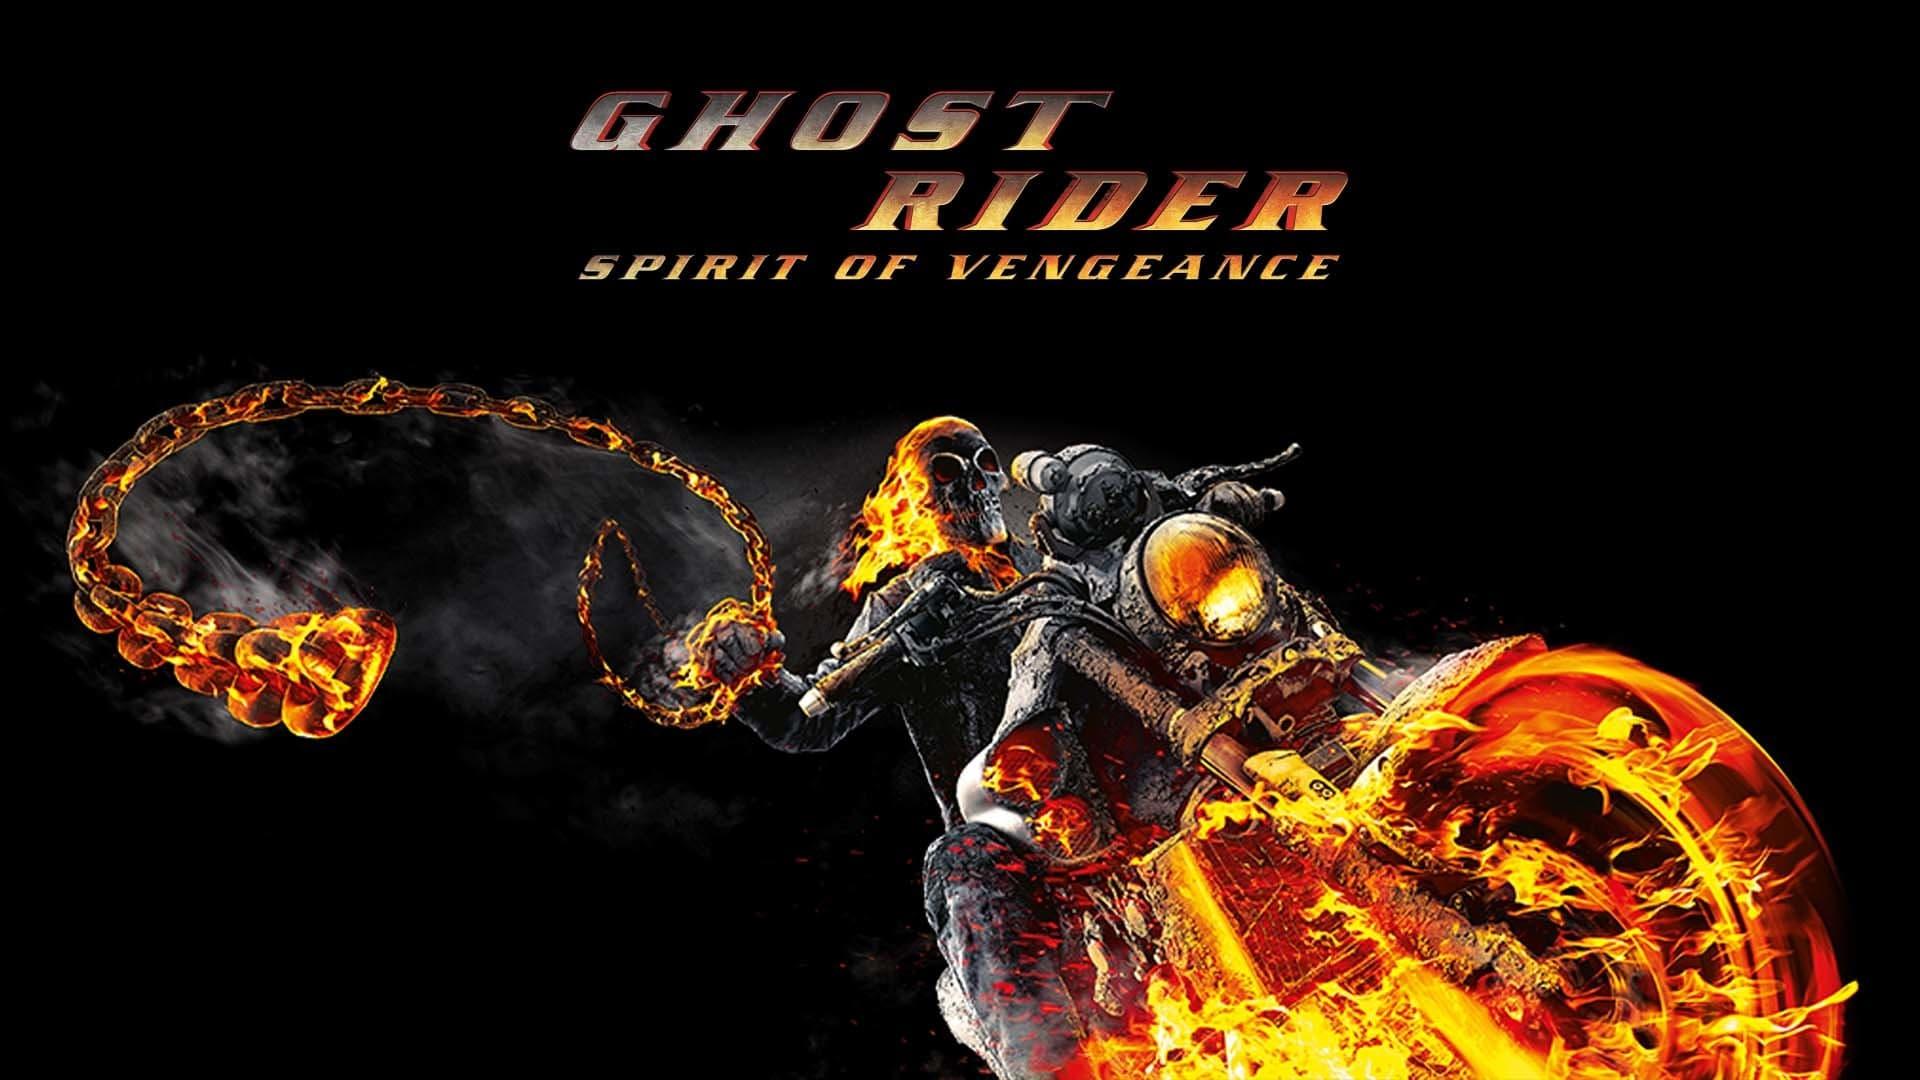 GHOST RIDER 3 Teaser (2024) With Keanu Reeves & Johnny Whitworth - YouTube